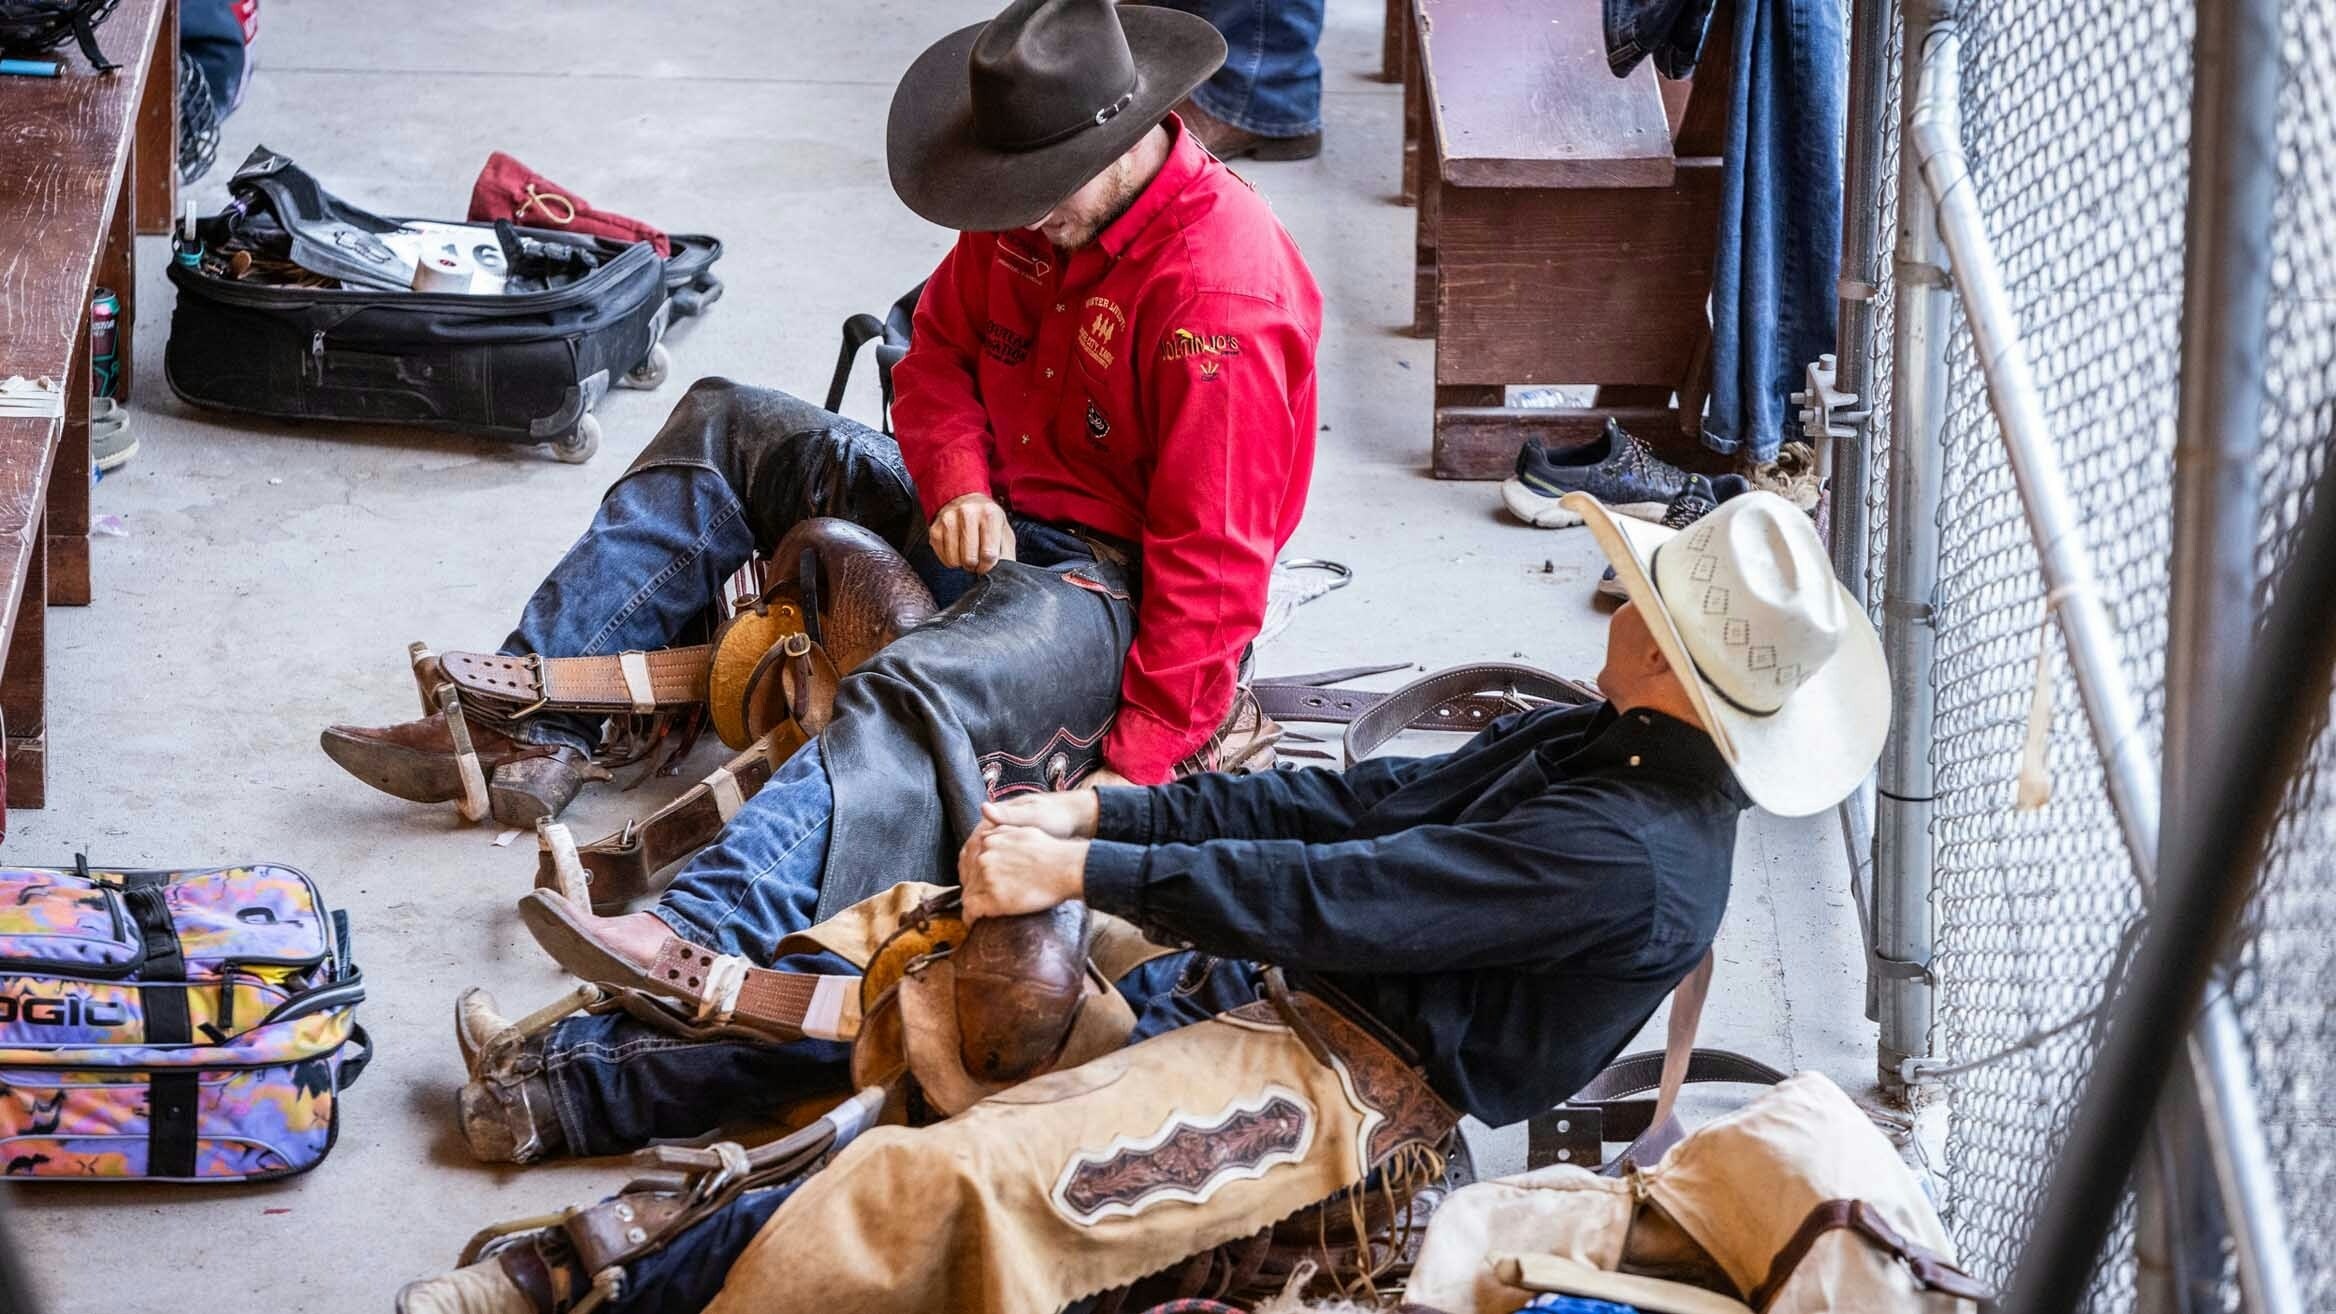 Saddle bronc riders get ready for their bronc ride in the ready area behind the chutes at Cheyenne Frontier Days on July 24, 2023.